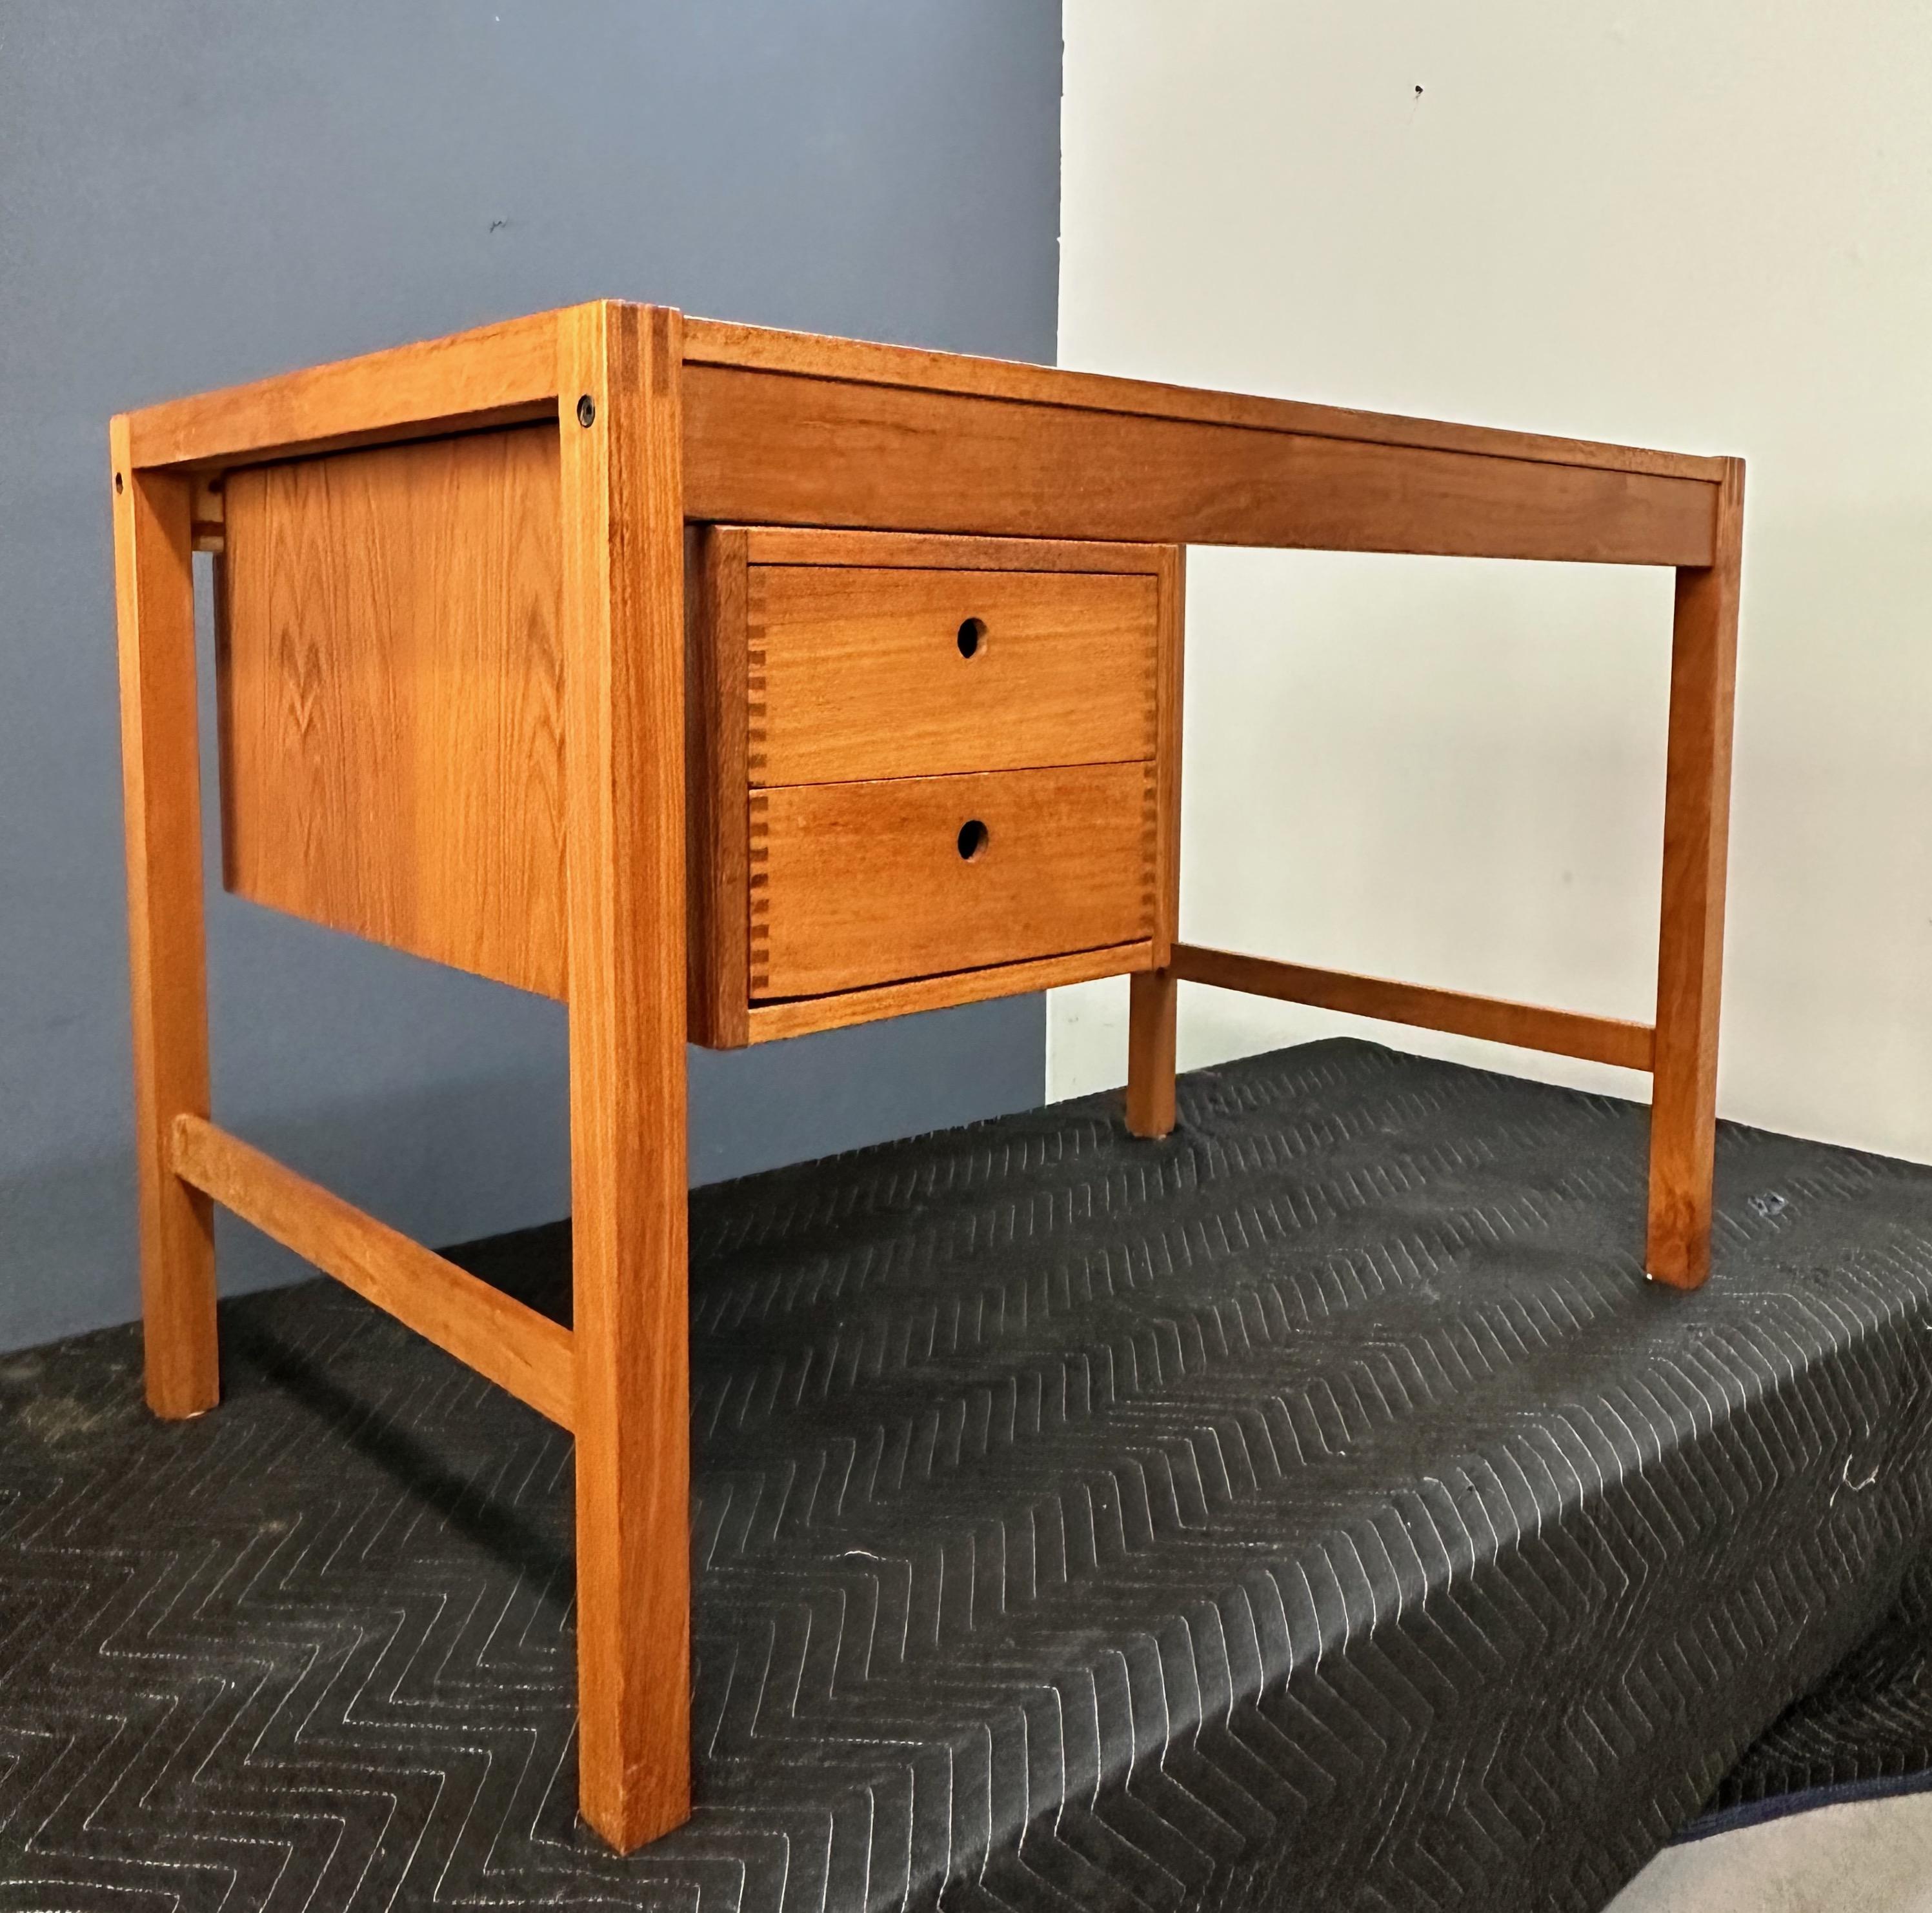 This vintage Danish desk is constructed of beautiful durable teak with visible box joints on drawers and desk corners.  One unique feature of note is the slide mounted drawer section which can move easily to any position along the length of the